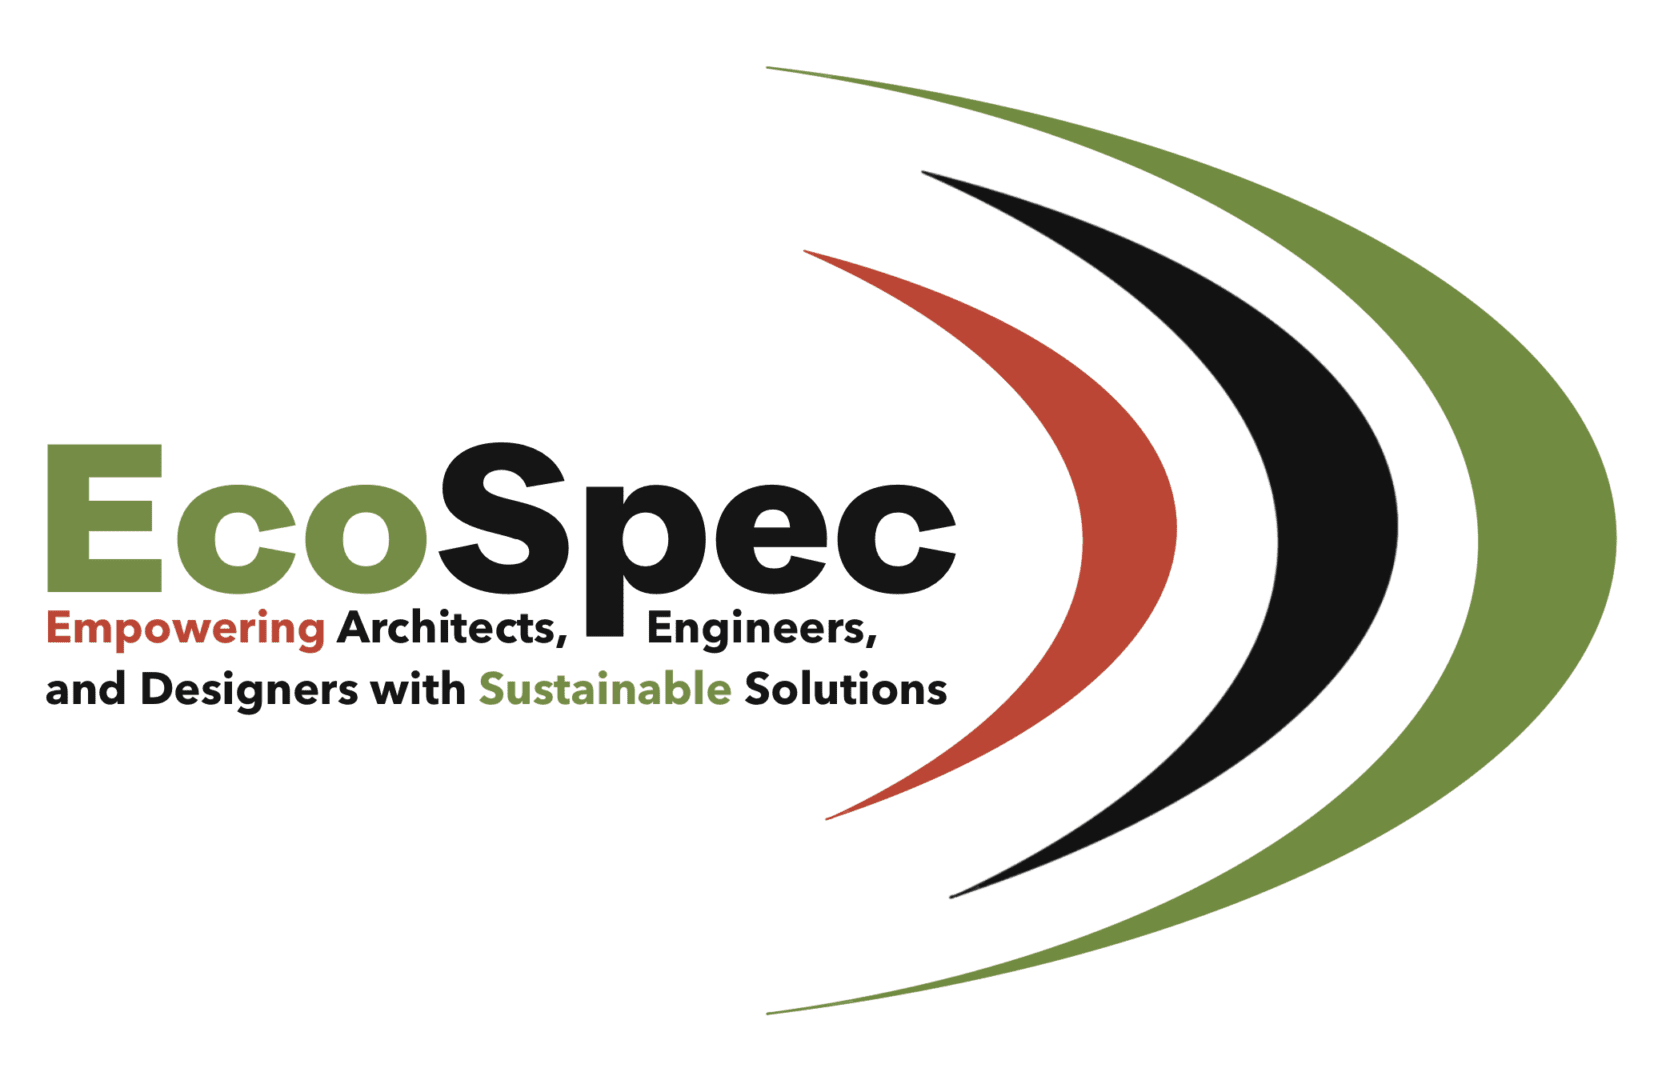 Light Background Eco-Spec Long Logo With Words